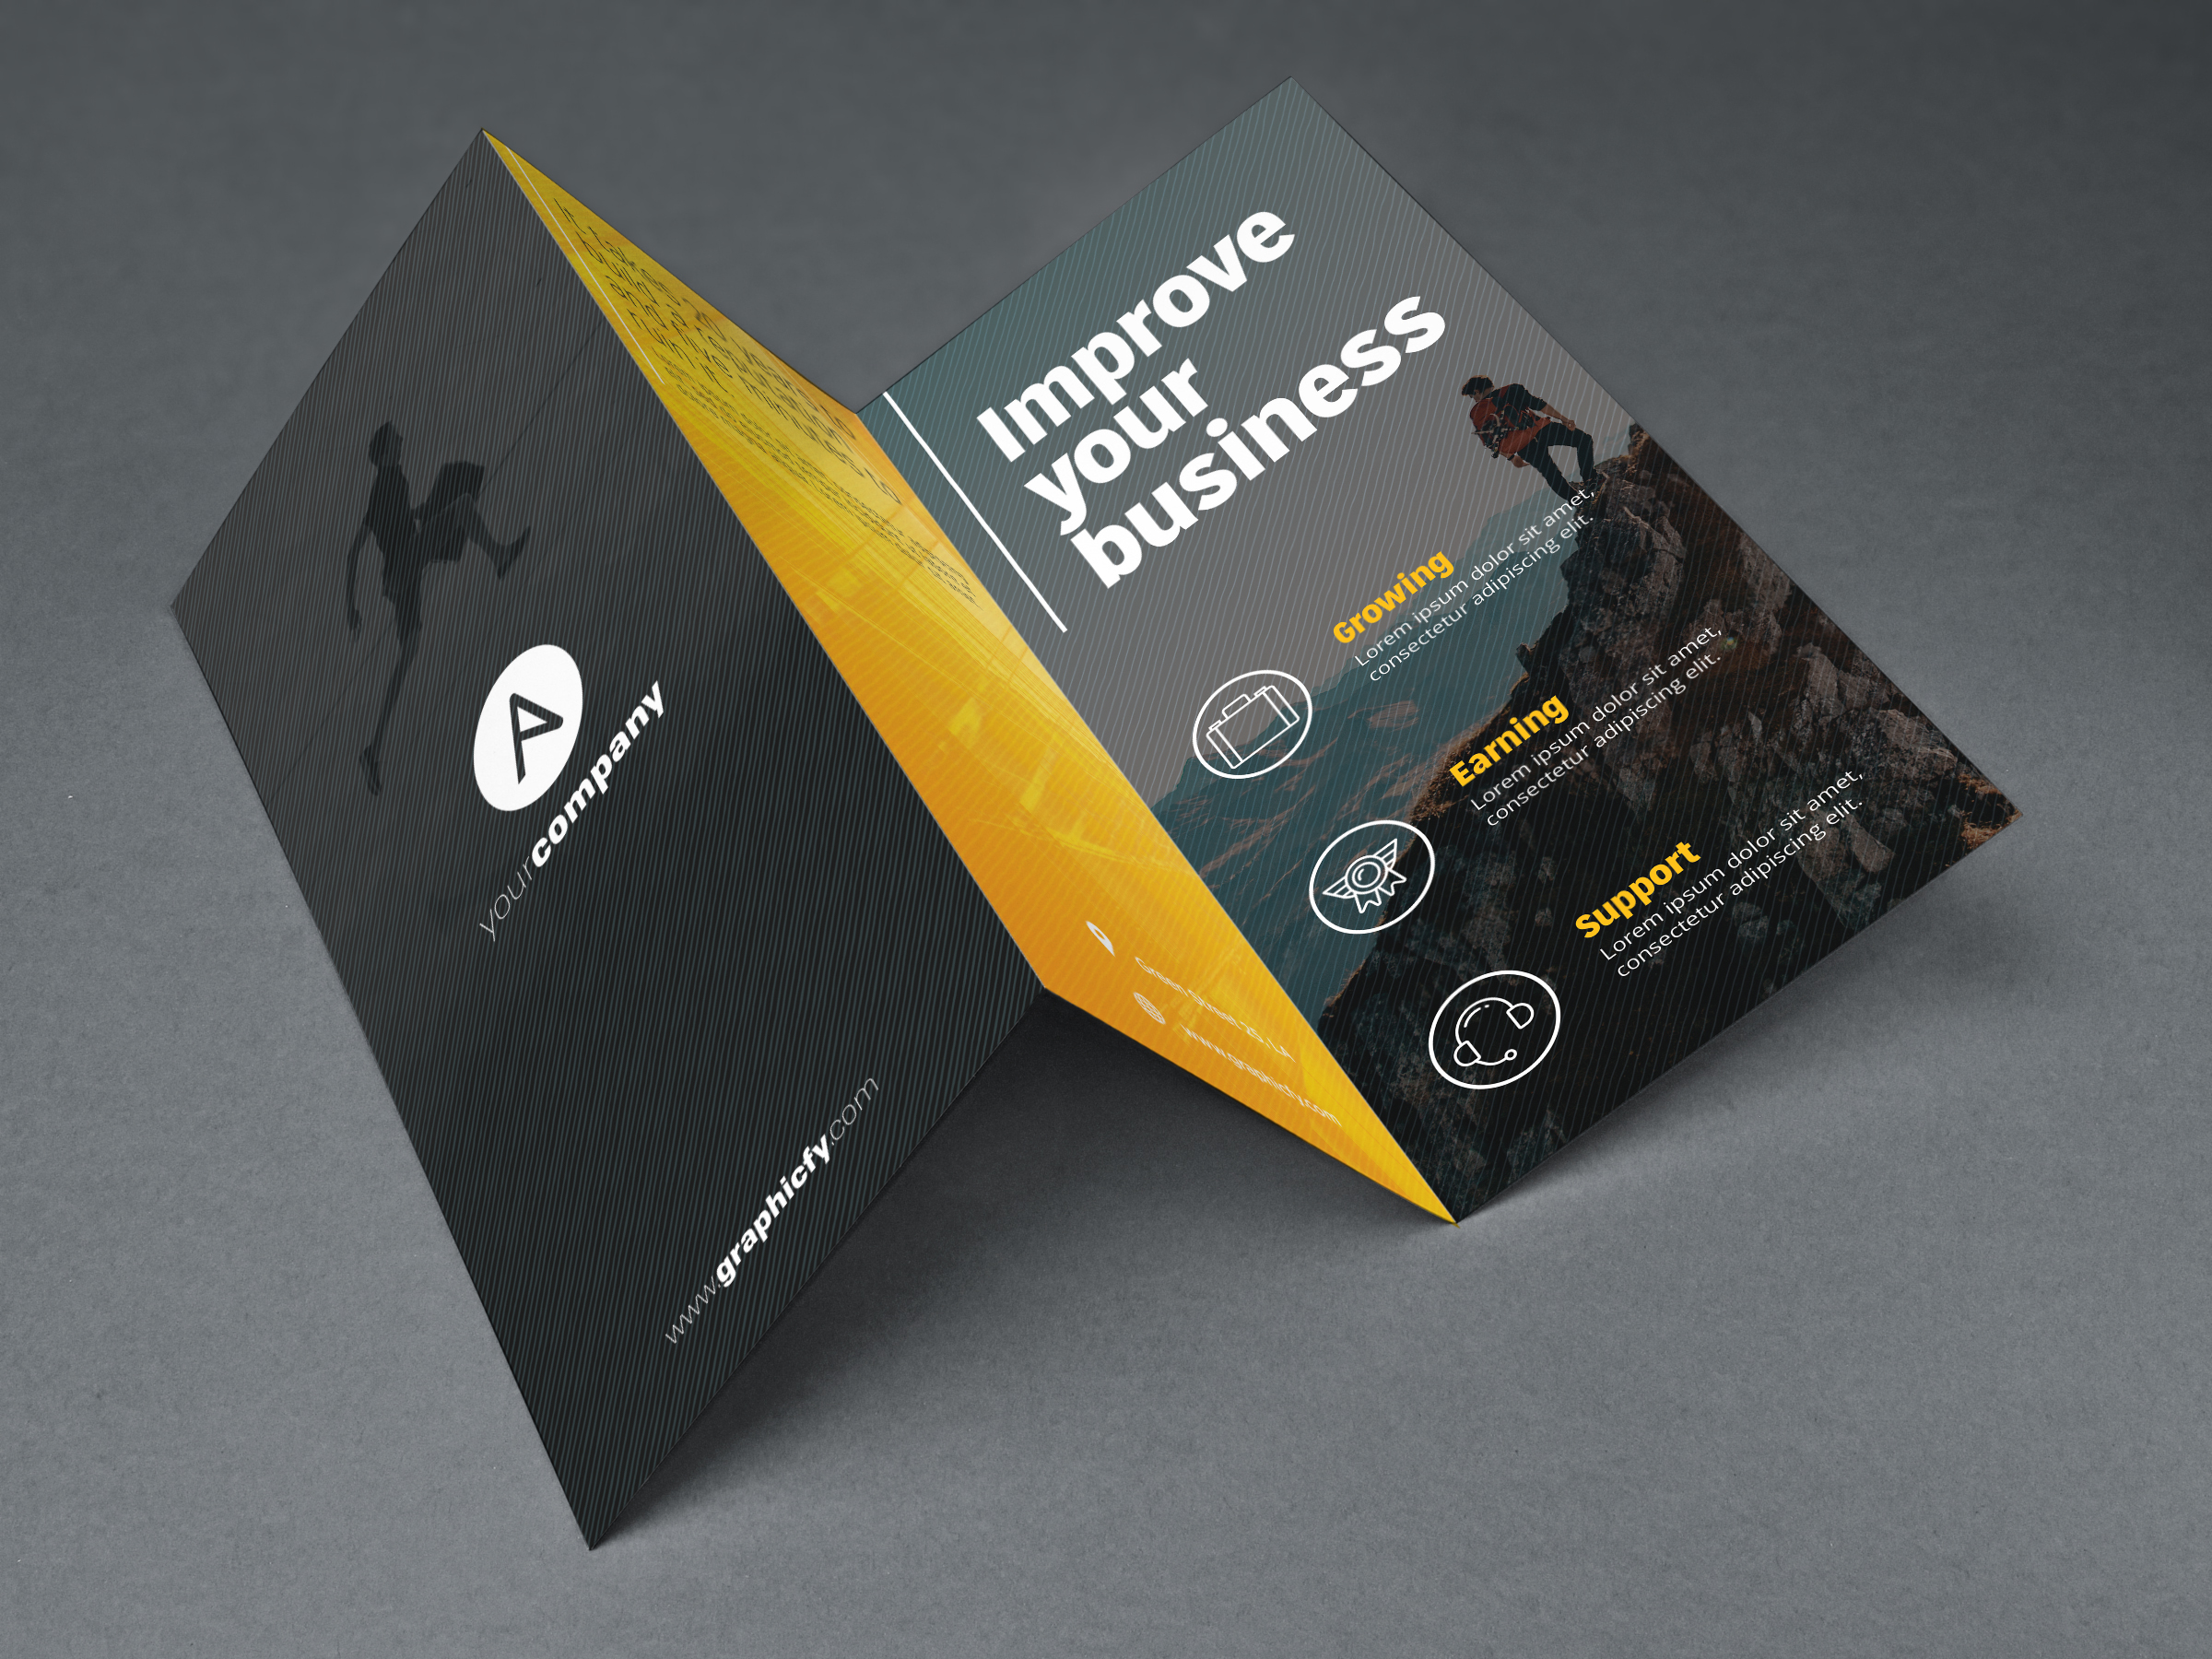 Tri Fold Brochure Template PSD Intended For 3 Fold Brochure Template Psd Free Download